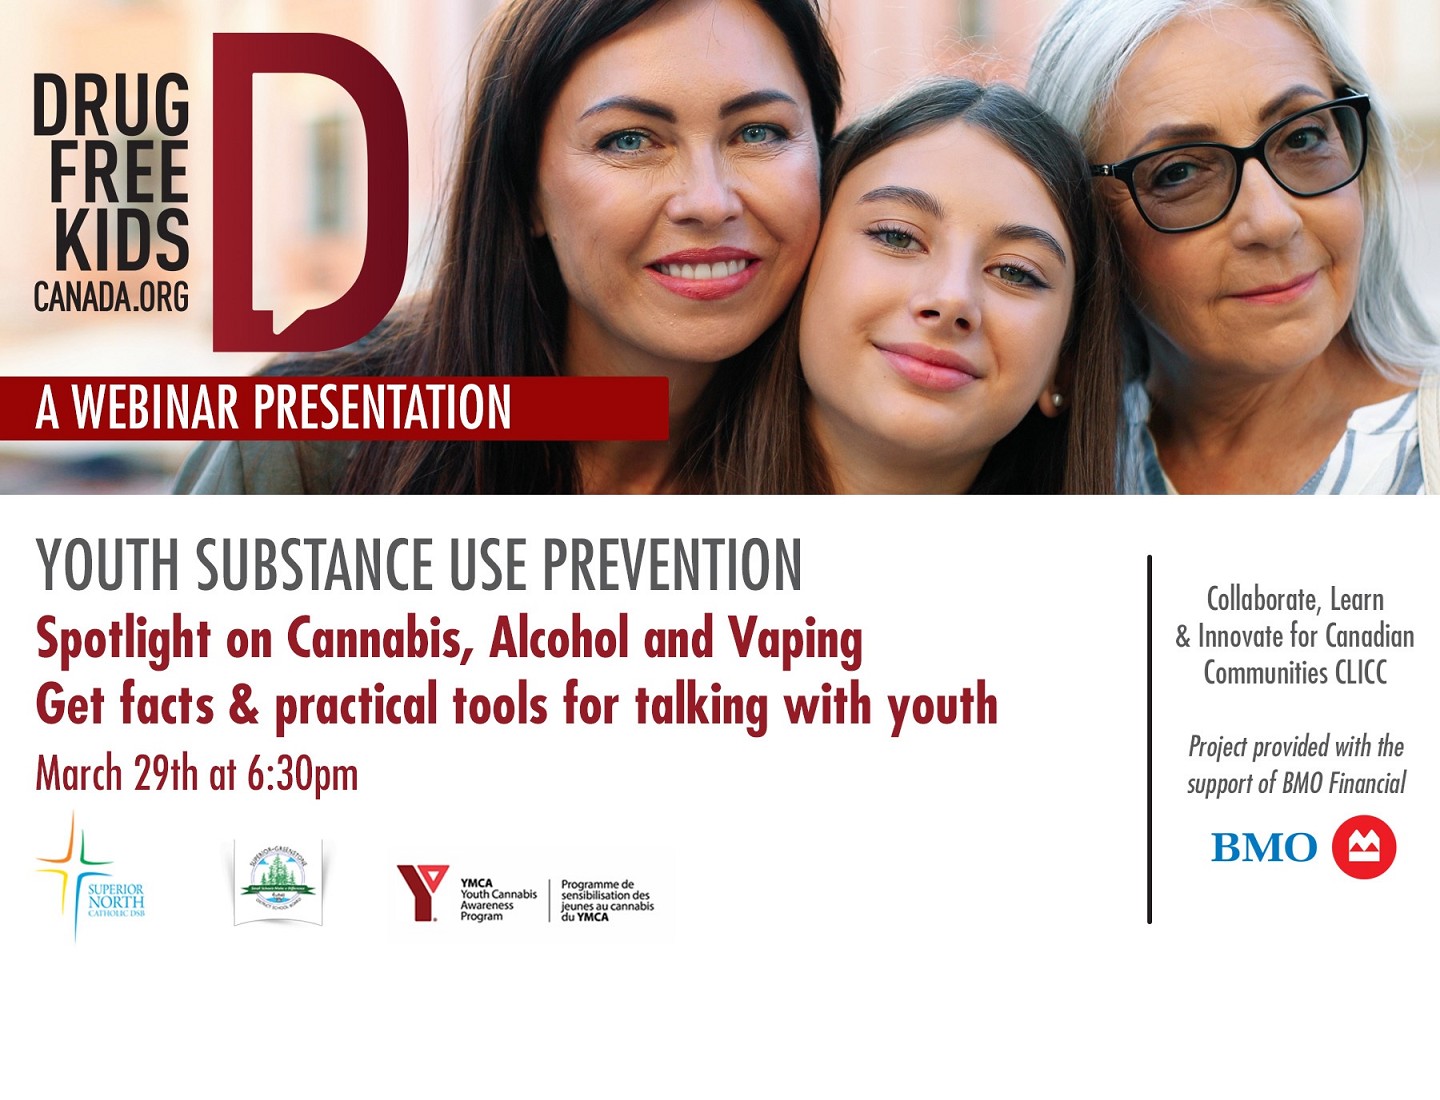 Webinar invitation for Youth Substance Use Prevention